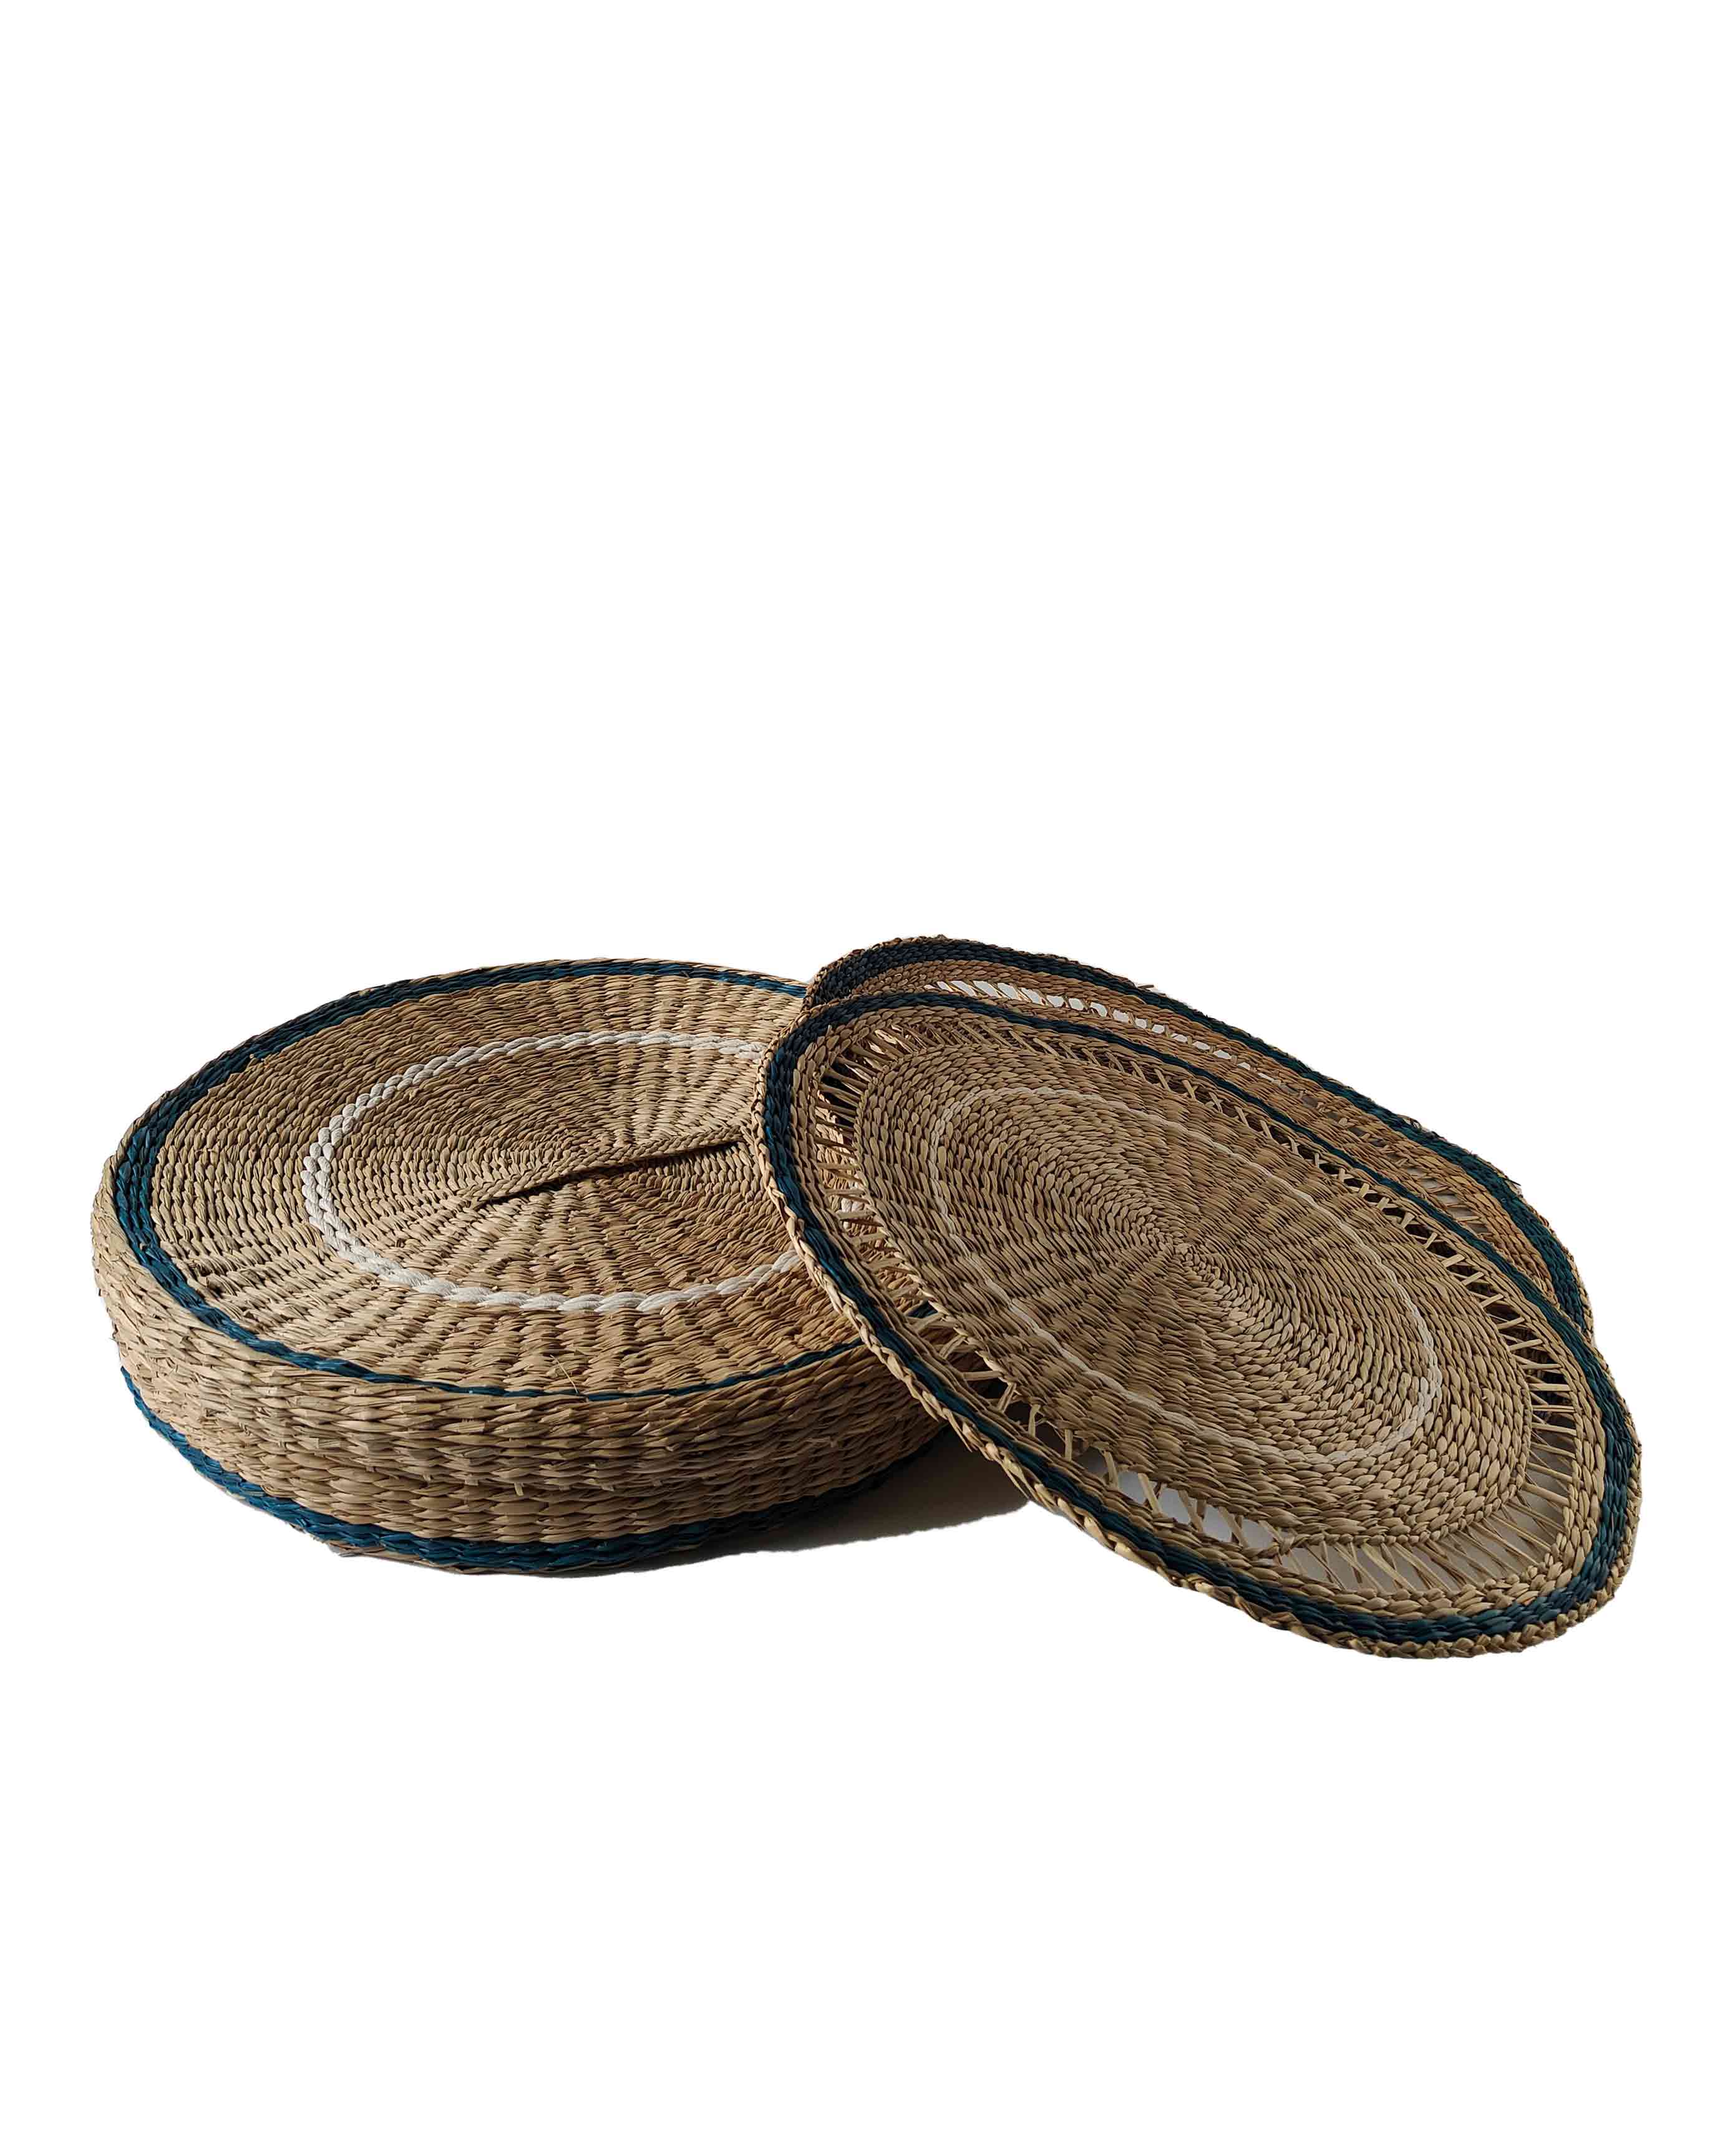 Lia Handwoven Seagrass Placemat Set & Basket- Set of 6